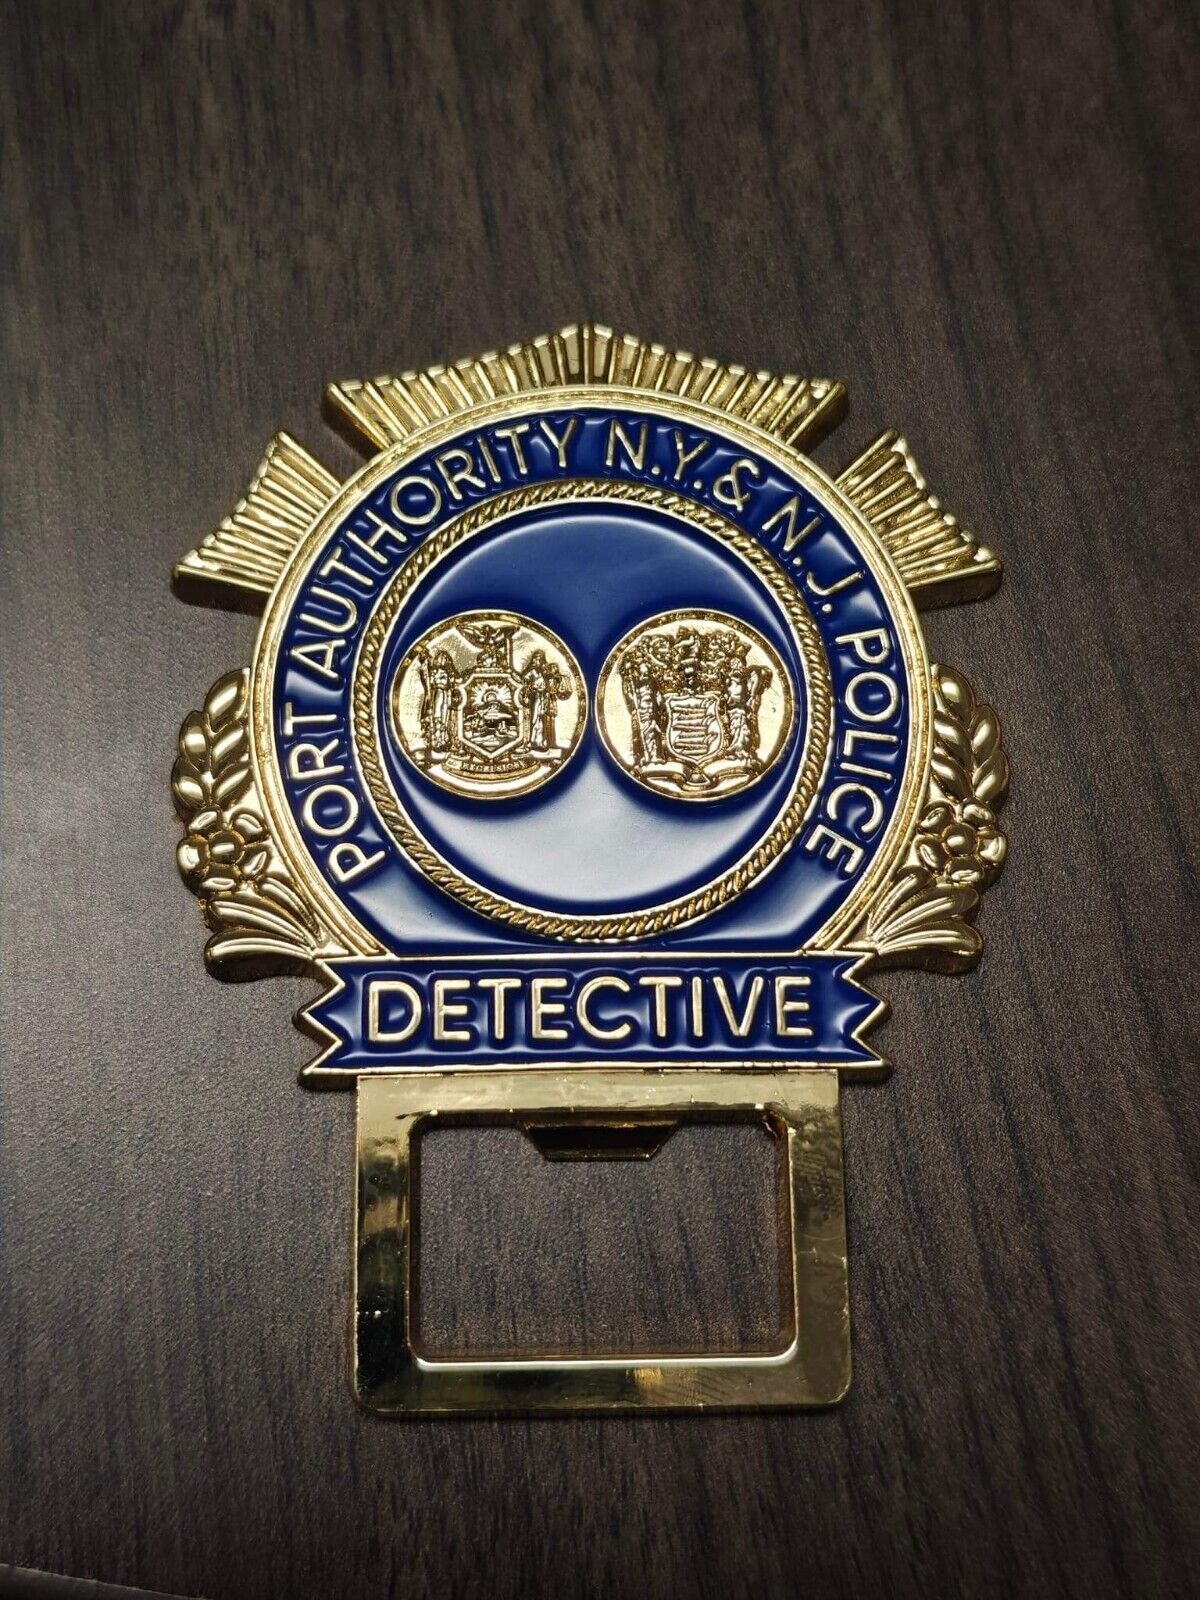  Port Authority Police Dept. Of NY & NJ Detective Bottle Opener Coin